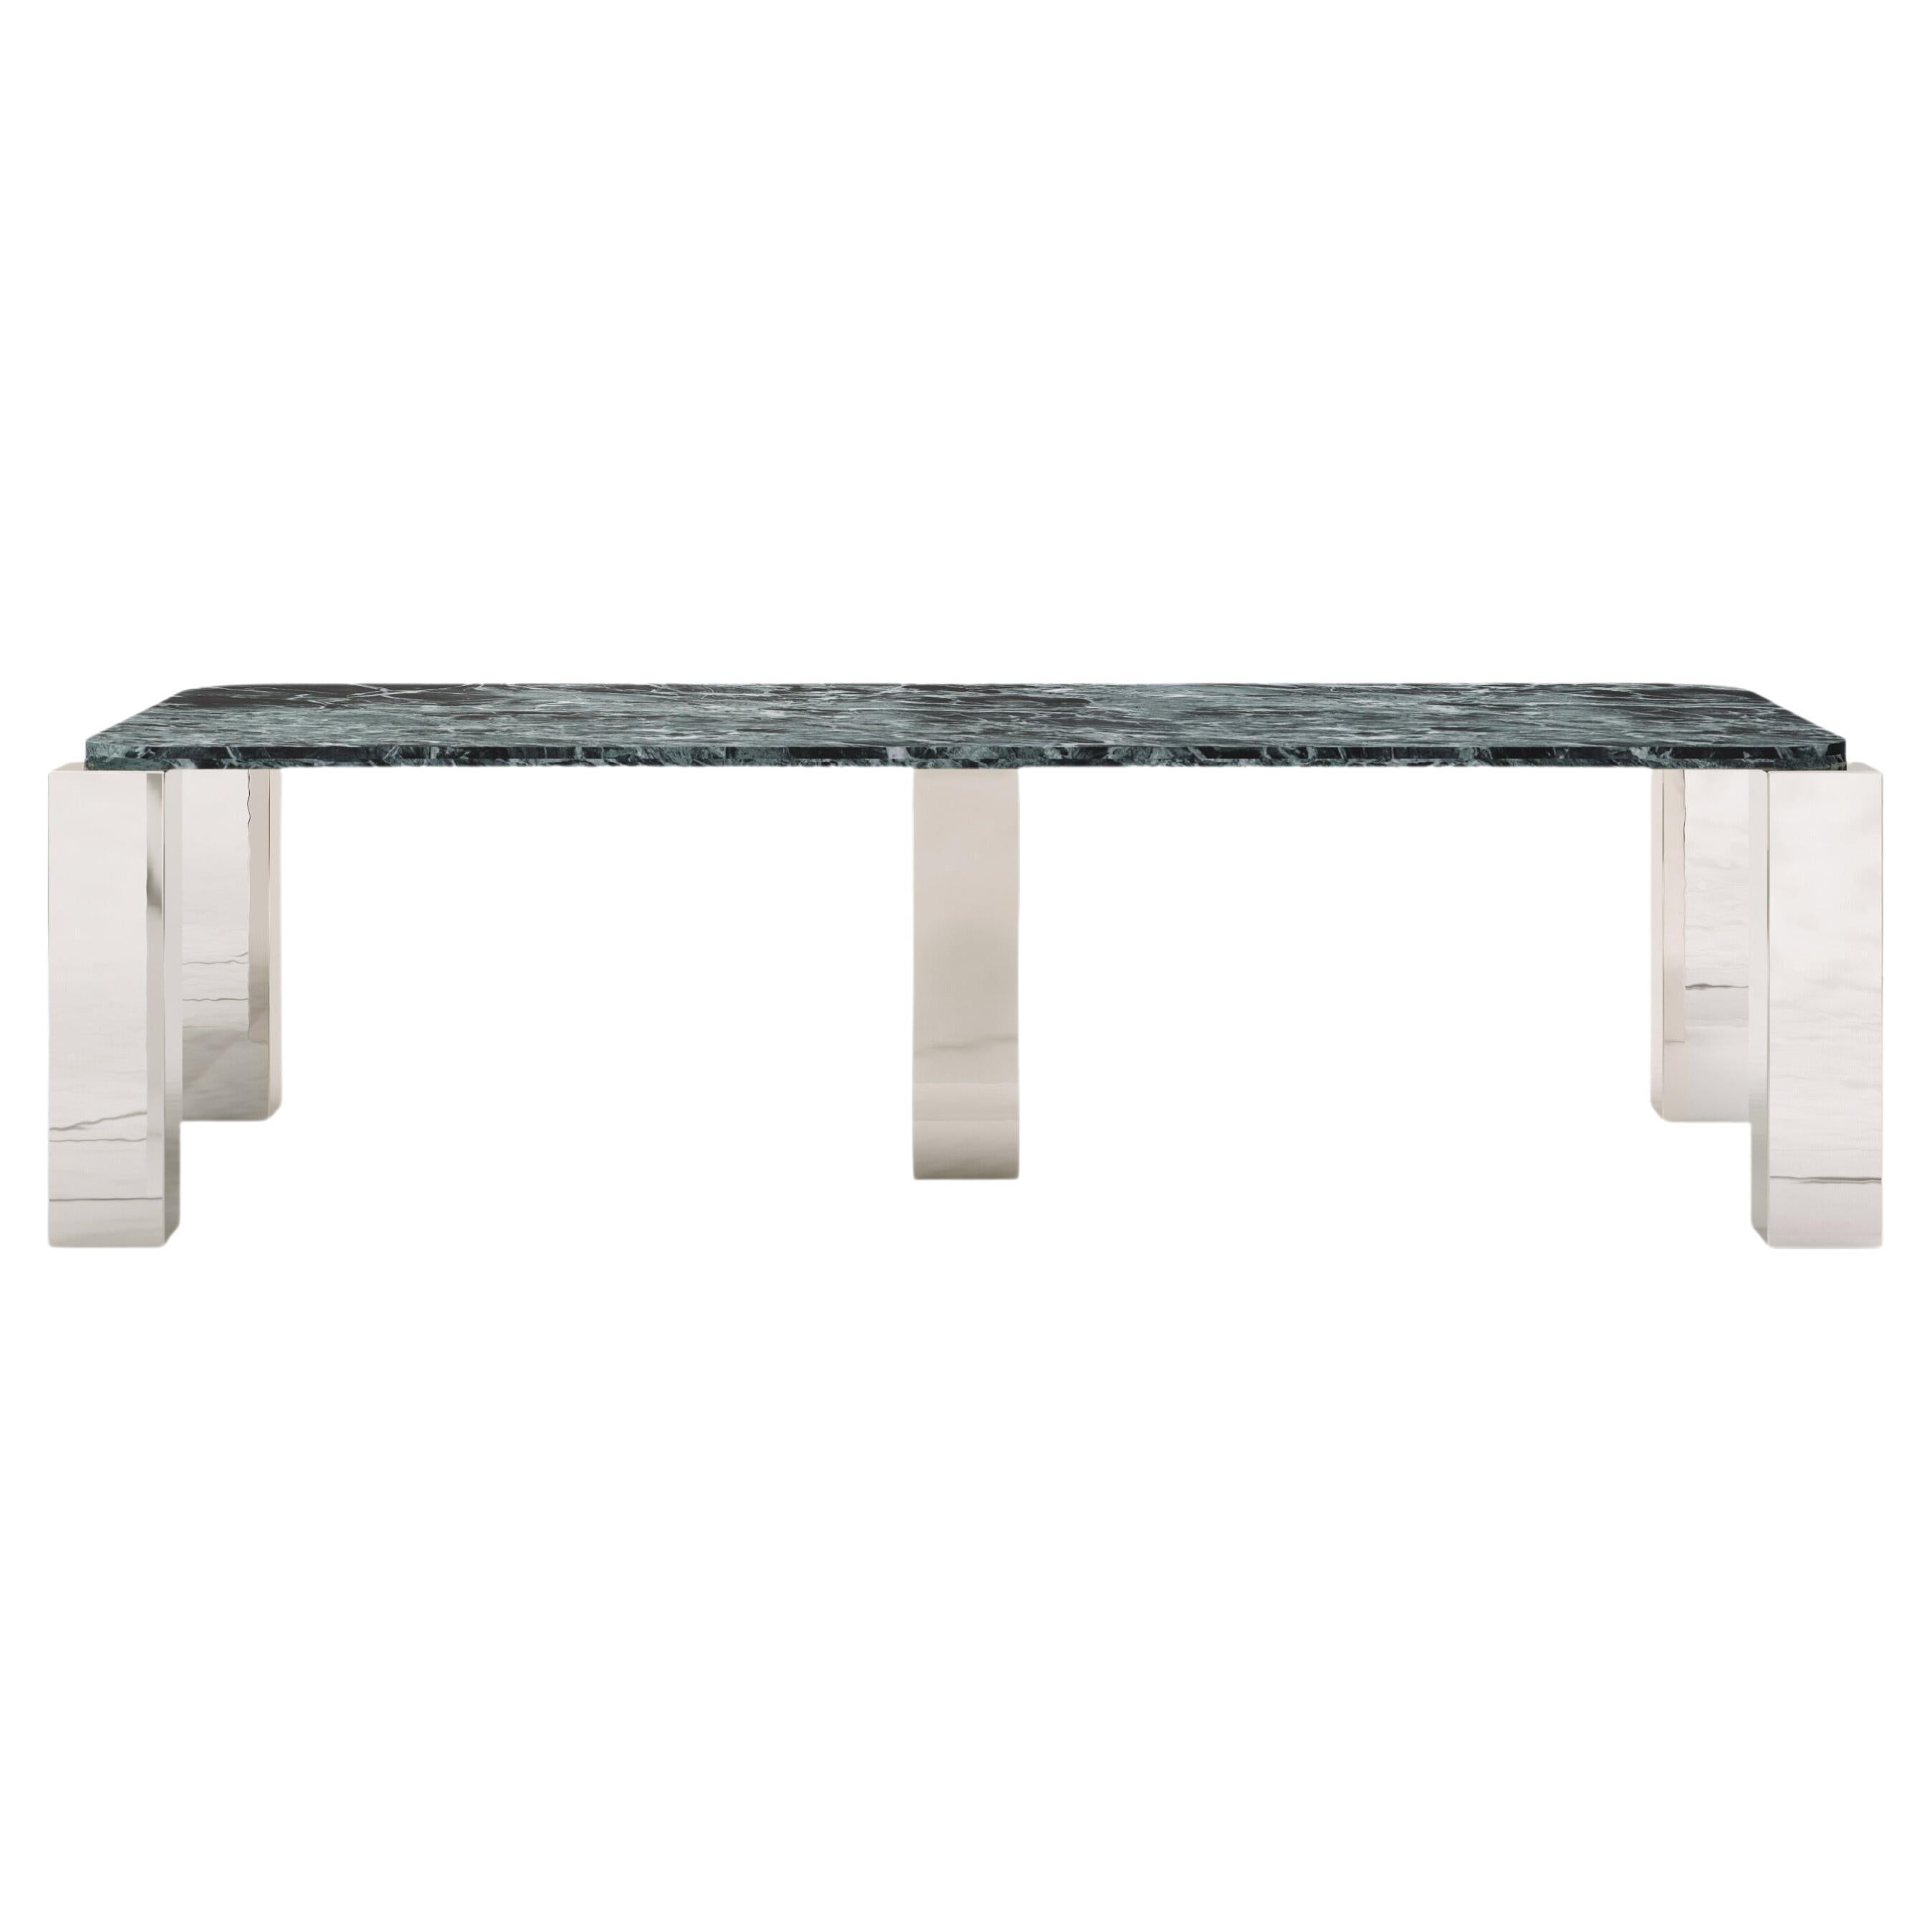 FORM(LA) Cubo Rectangle Dining Table 98”L x 44”W x 30”H Verde Marble & Chrome For Sale